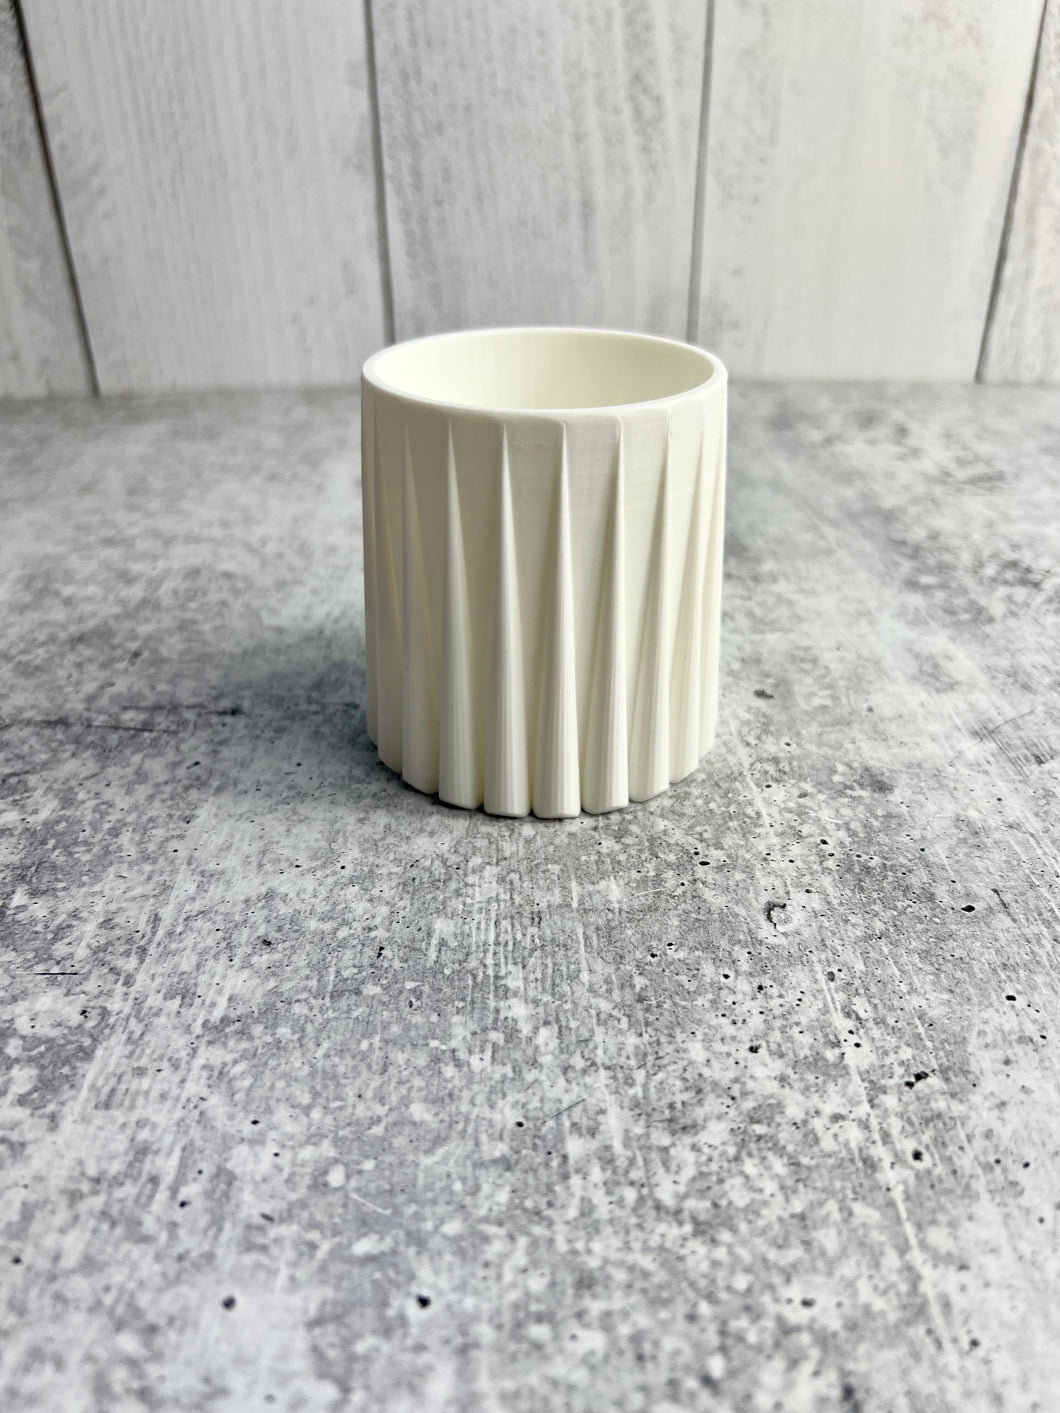 3D Printed Plant Pot - Indoor Pot for Plant - Planter with Drainage